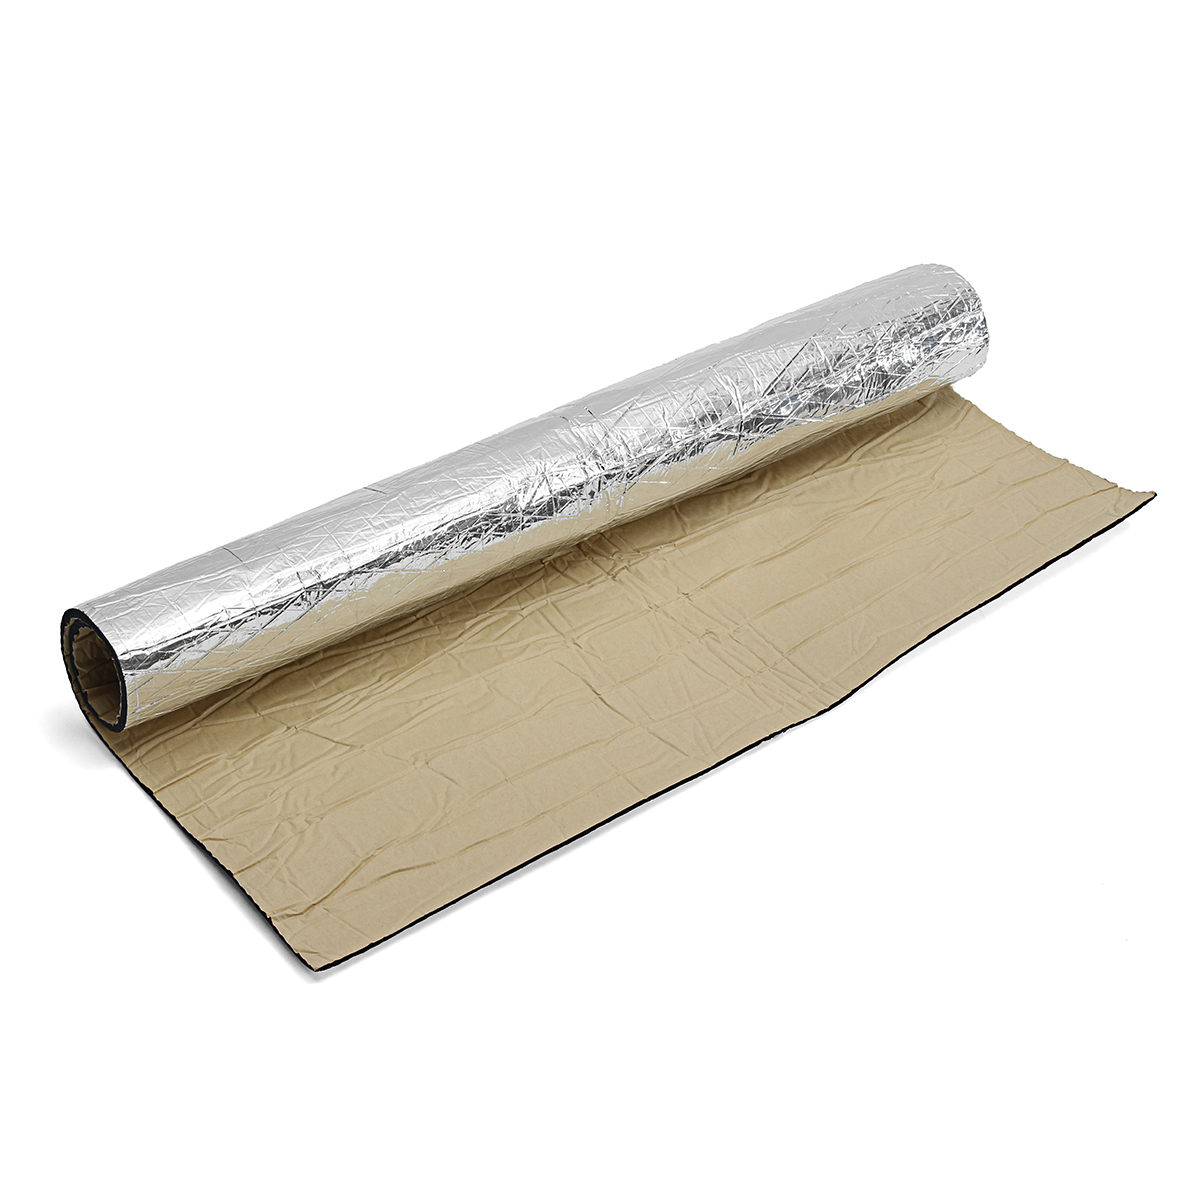 140/100*100cm Glass Fibre Sound Proofing Deadening Insulation 7mm Closed Cell Foam